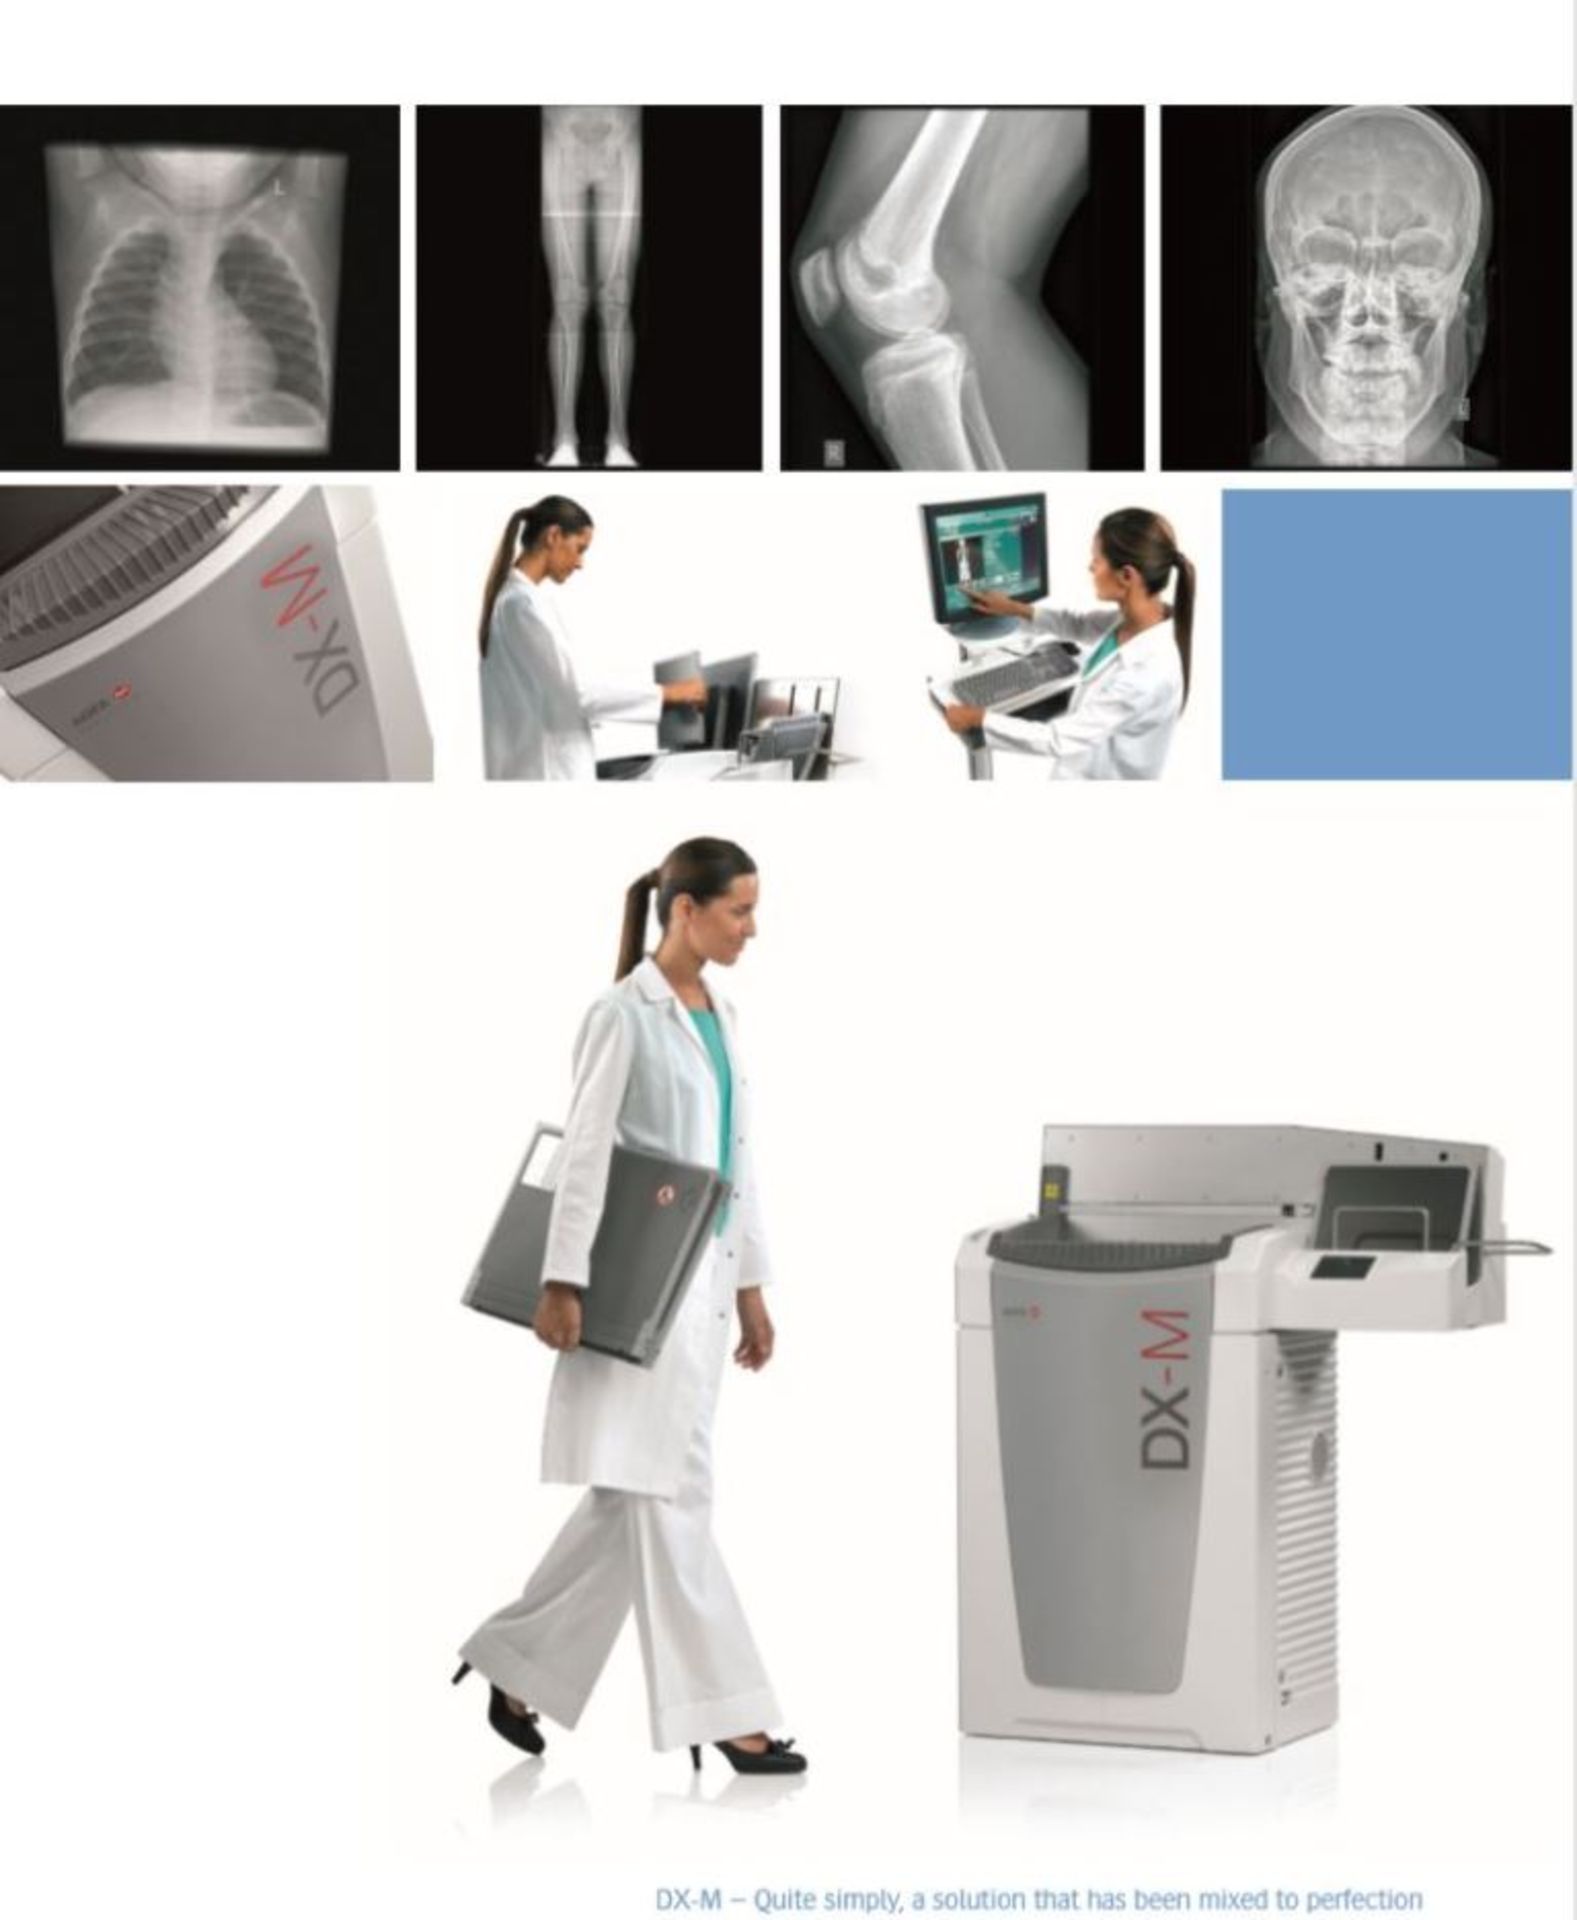 LOCATED OFF SITE - Agfa HealthCare’s DX-M CR (Computed Radiography) solution with needle-b - Image 13 of 16